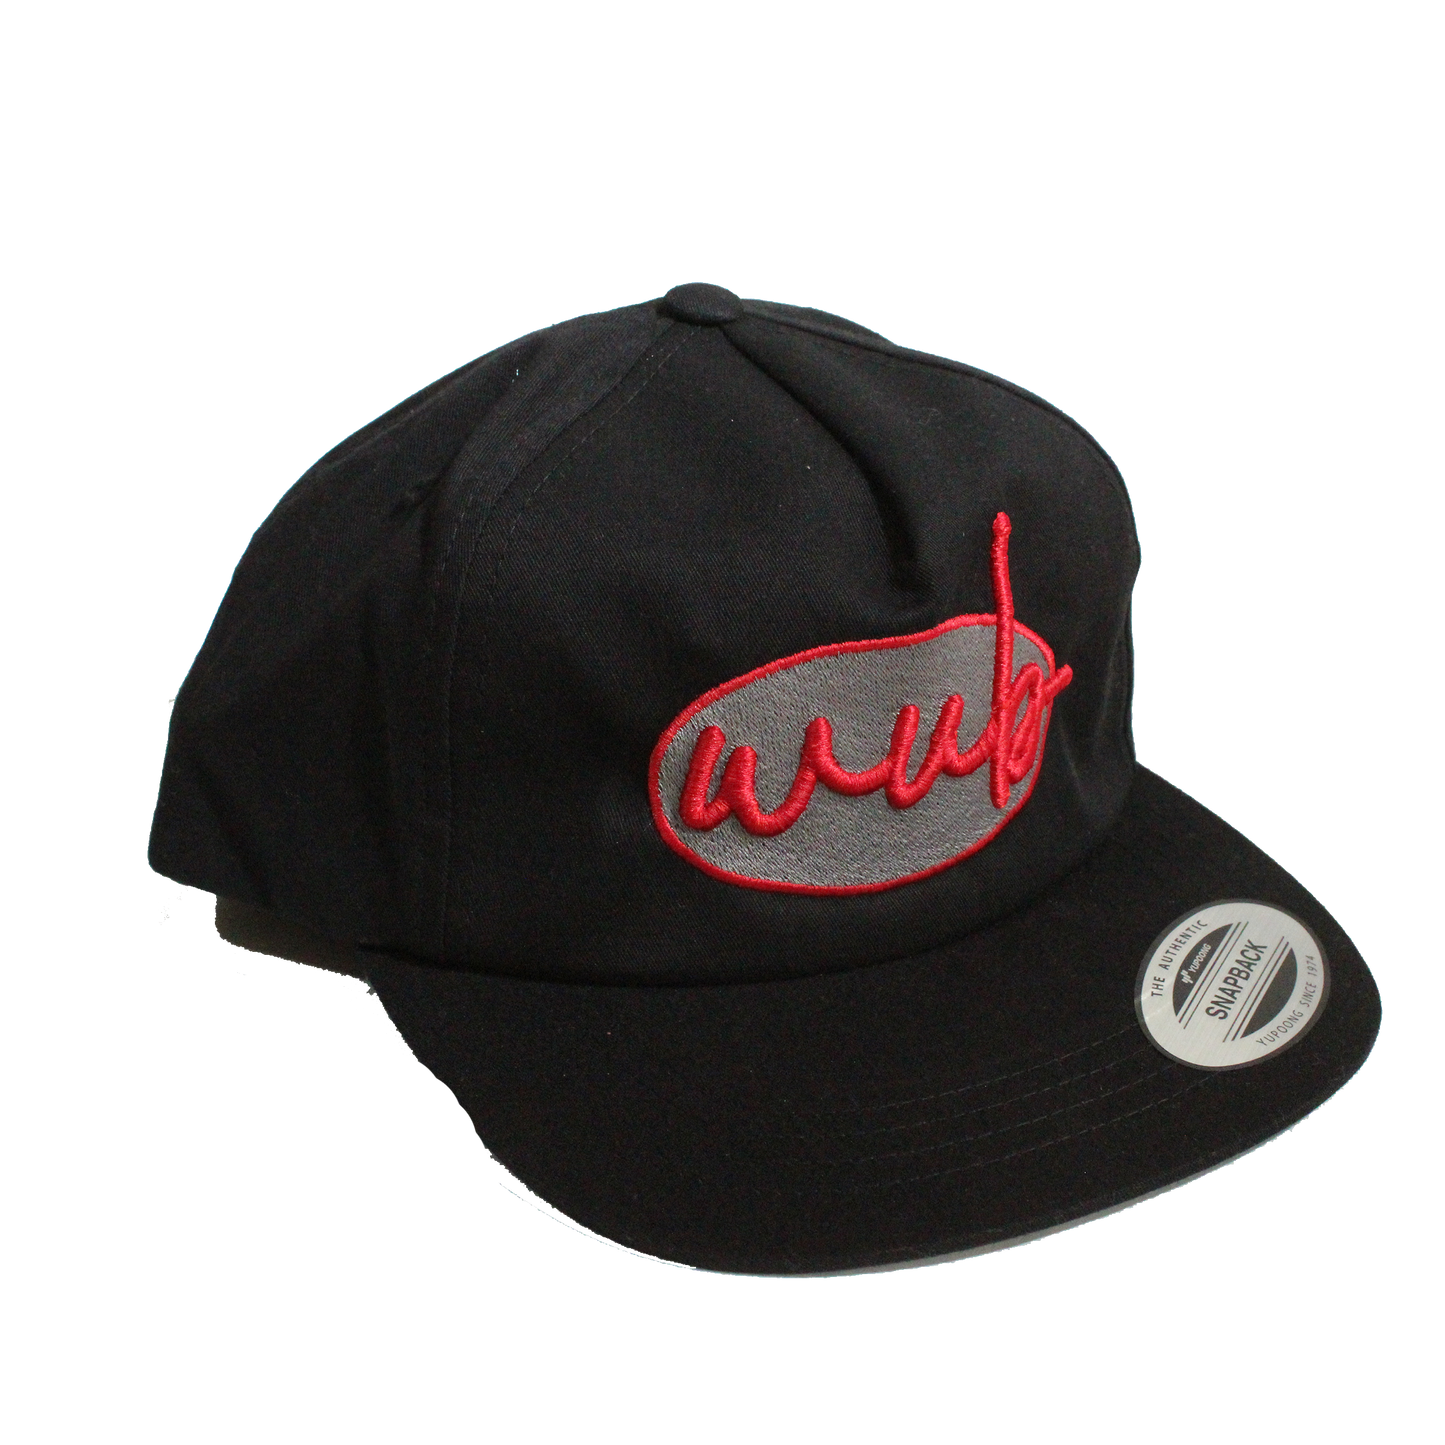 PUFFY OVAL UNSTRUCTURED SNAPBACK - BLACK